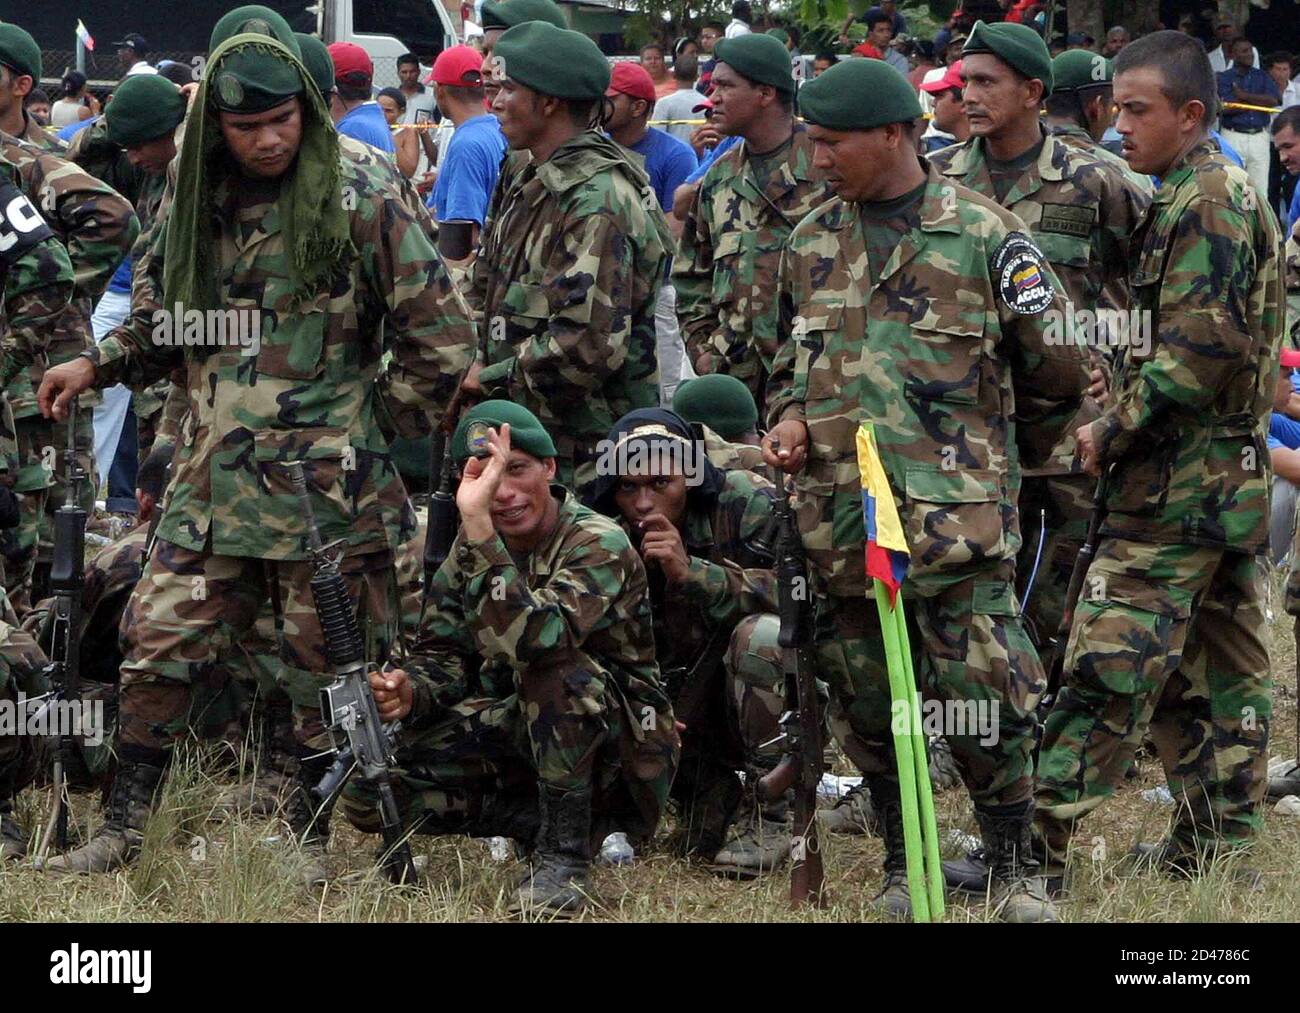 Far-right paramilitary fighters wait as they prepare to surrender their  weapons in in San Pablo, Colombia. Far-right paramilitary fighters wait as  they prepare to surrender their weapons in San Pablo, Colombia, July